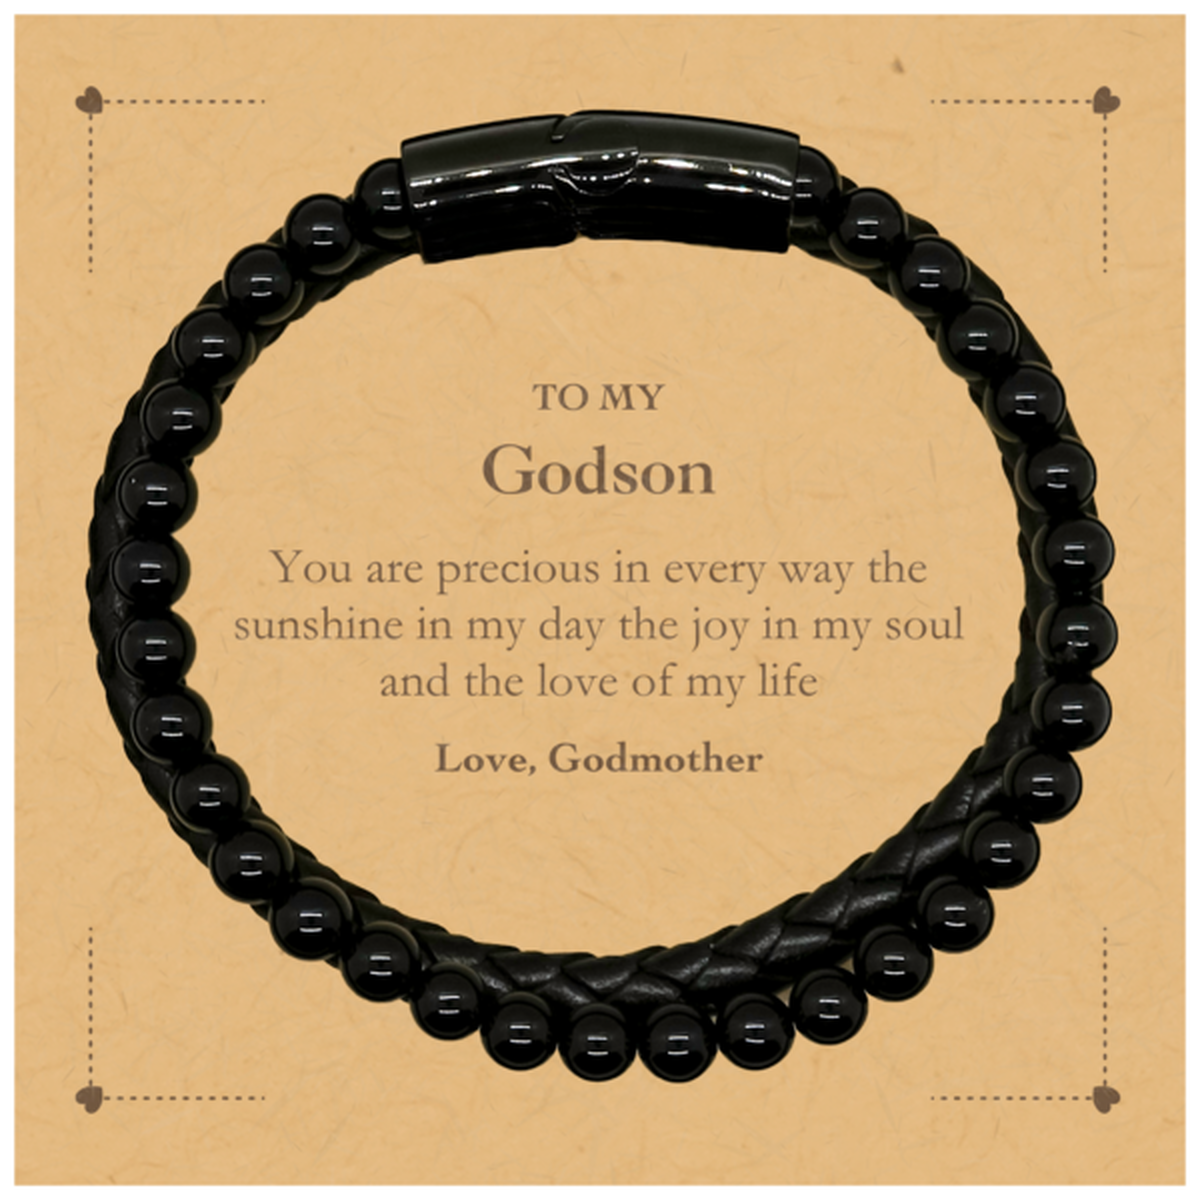 Graduation Gifts for Godson Stone Leather Bracelets Present from Godmother, Christmas Godson Birthday Gifts Godson You are precious in every way the sunshine in my day. Love, Godmother